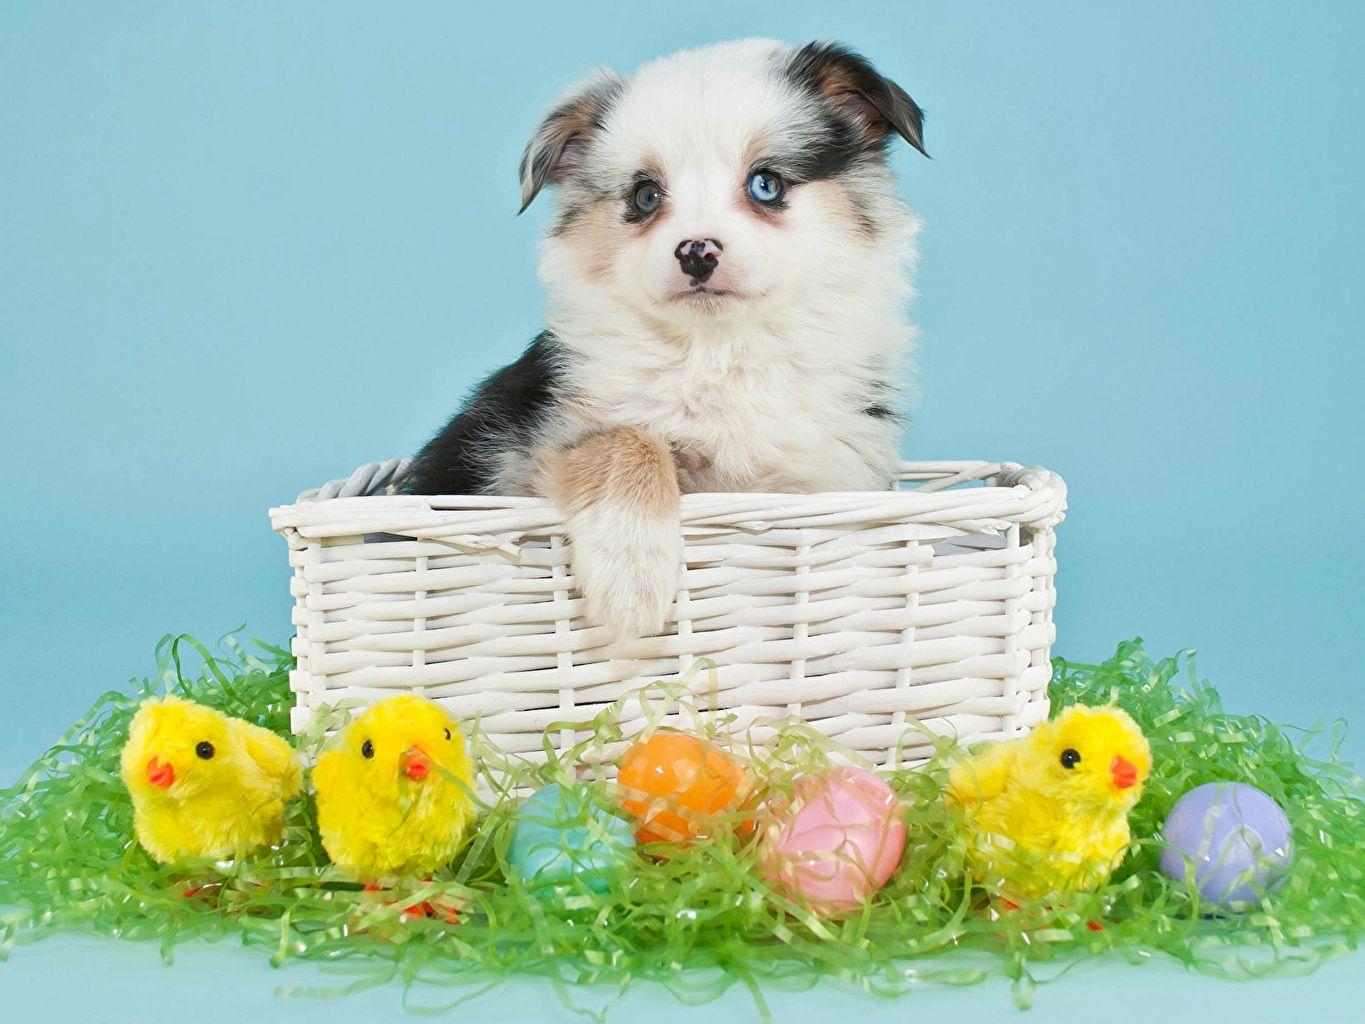 Easter Puppy Dogs Chicks Eggs Wicker basket Animals Holidays